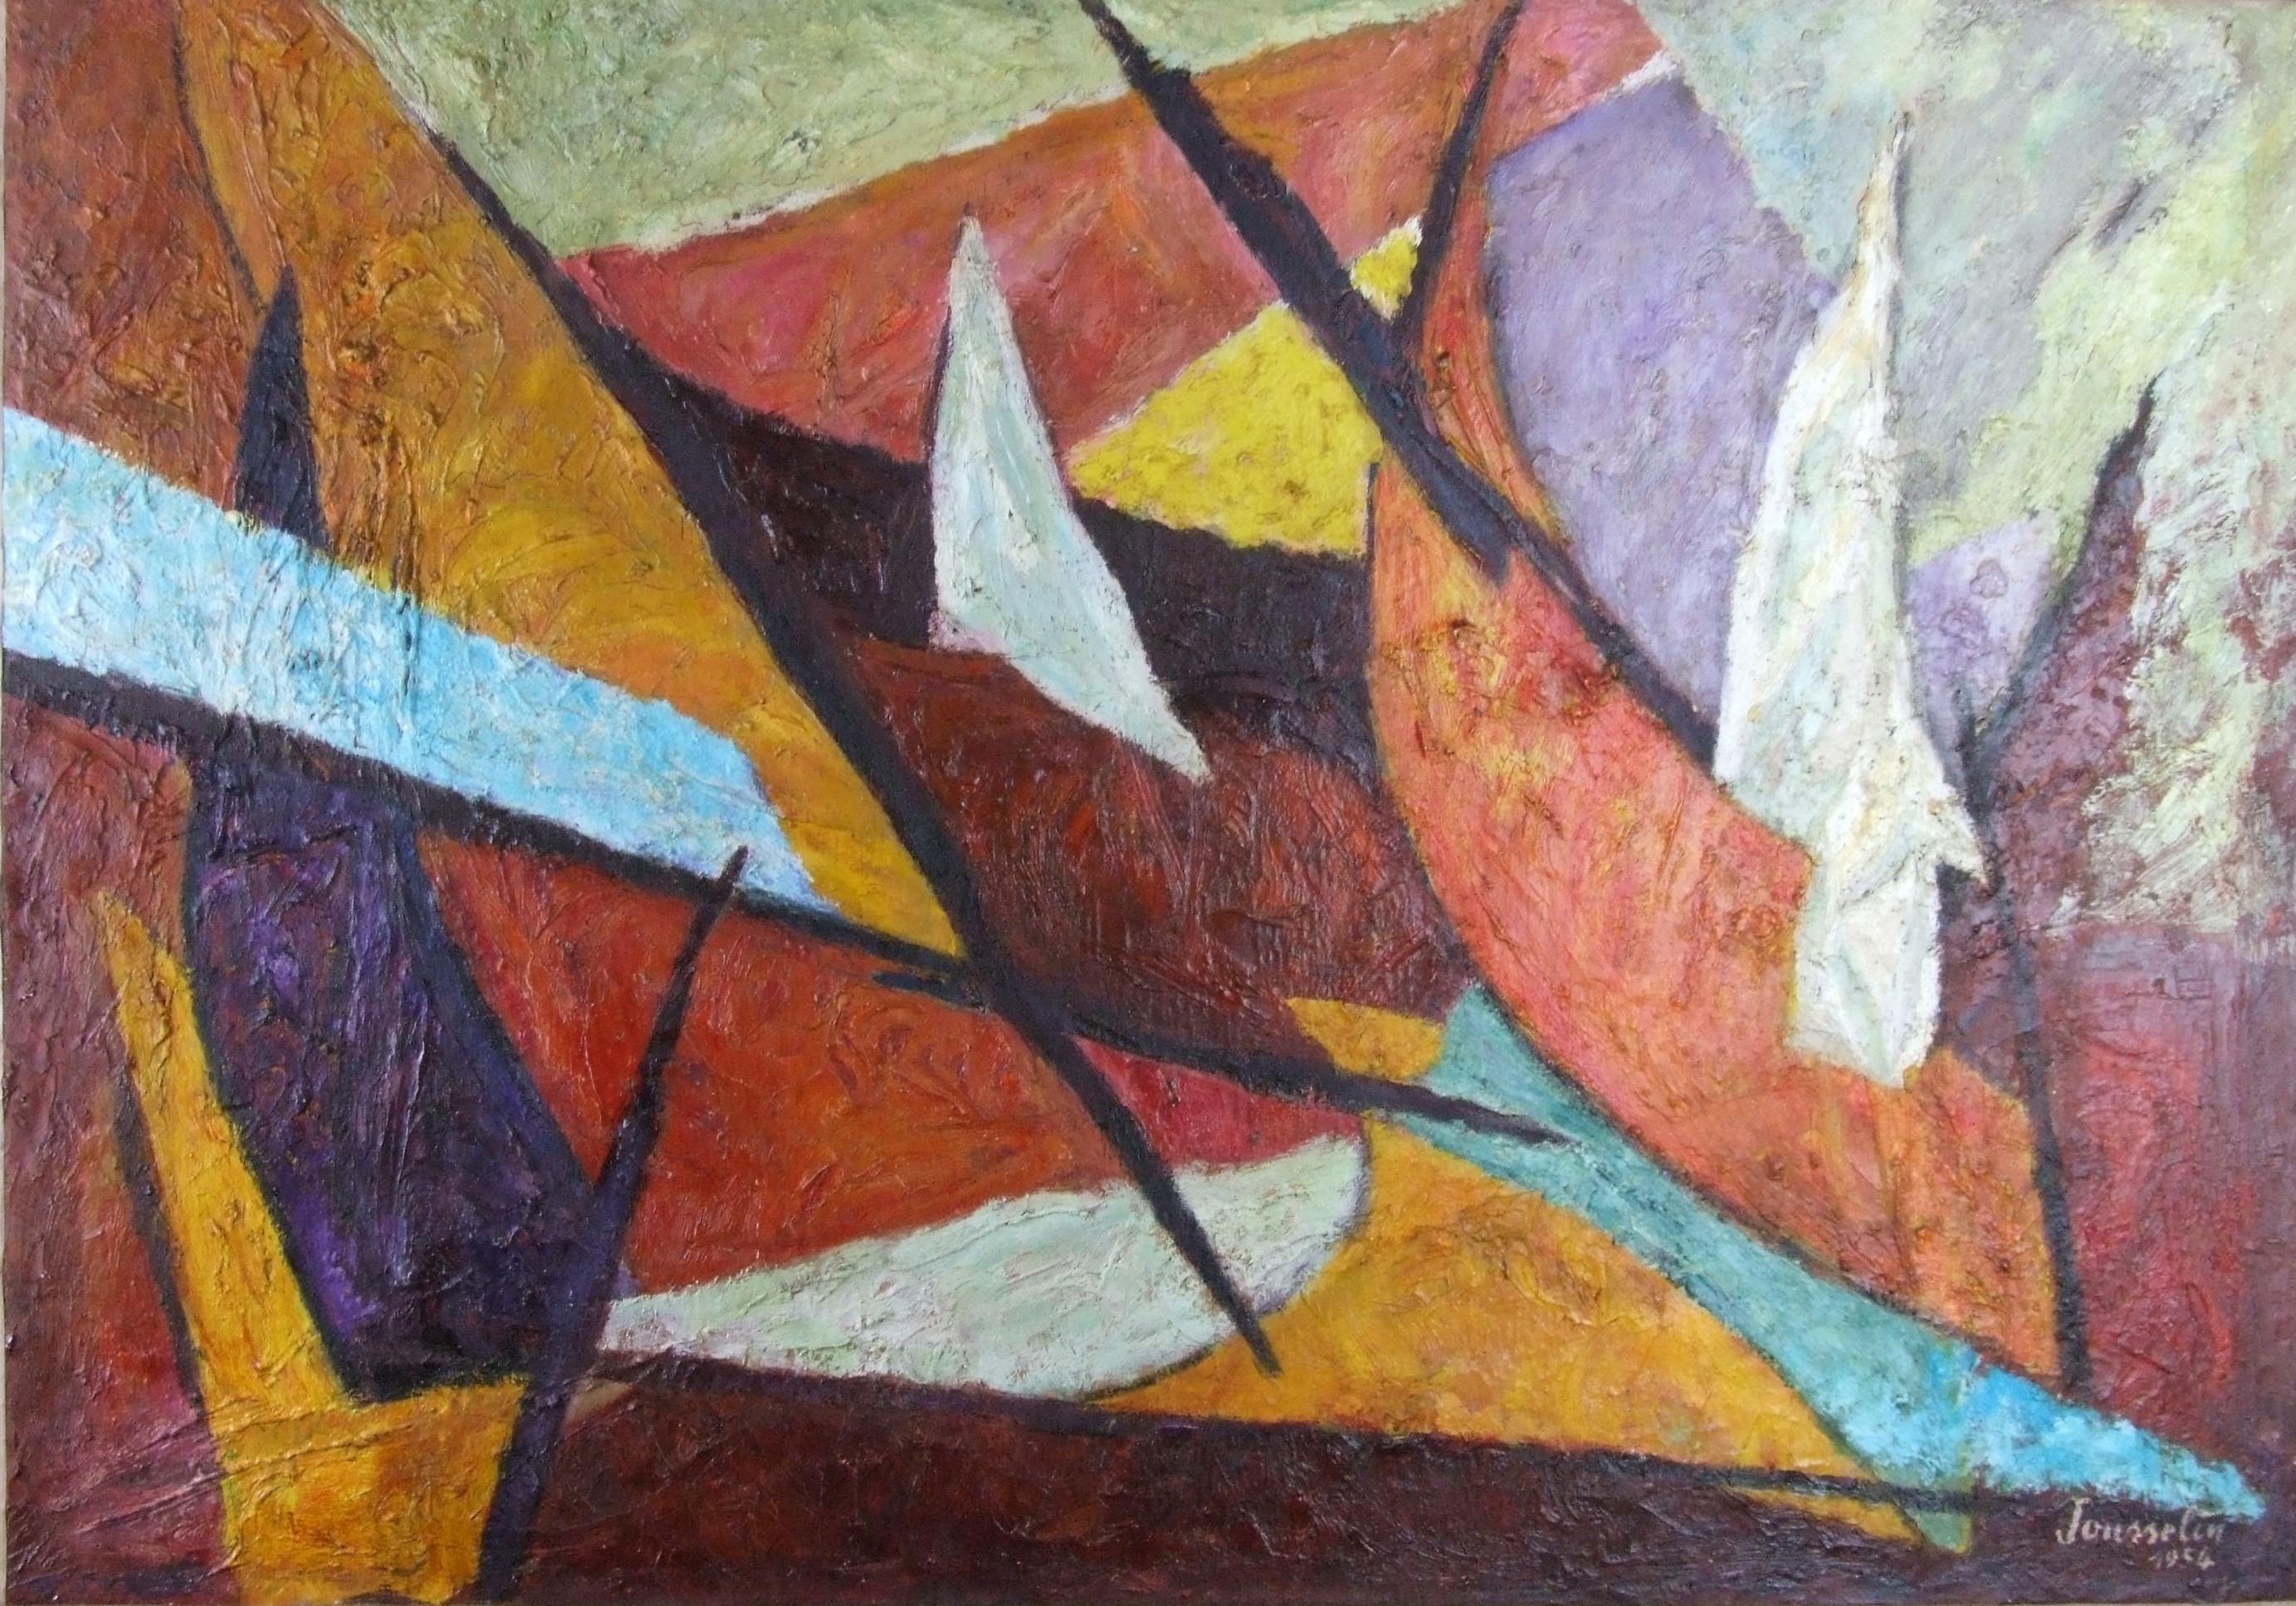 François Jousselin Abstract Painting - abstract 3, 1954 - Oil on canvas, 92x65 cm.